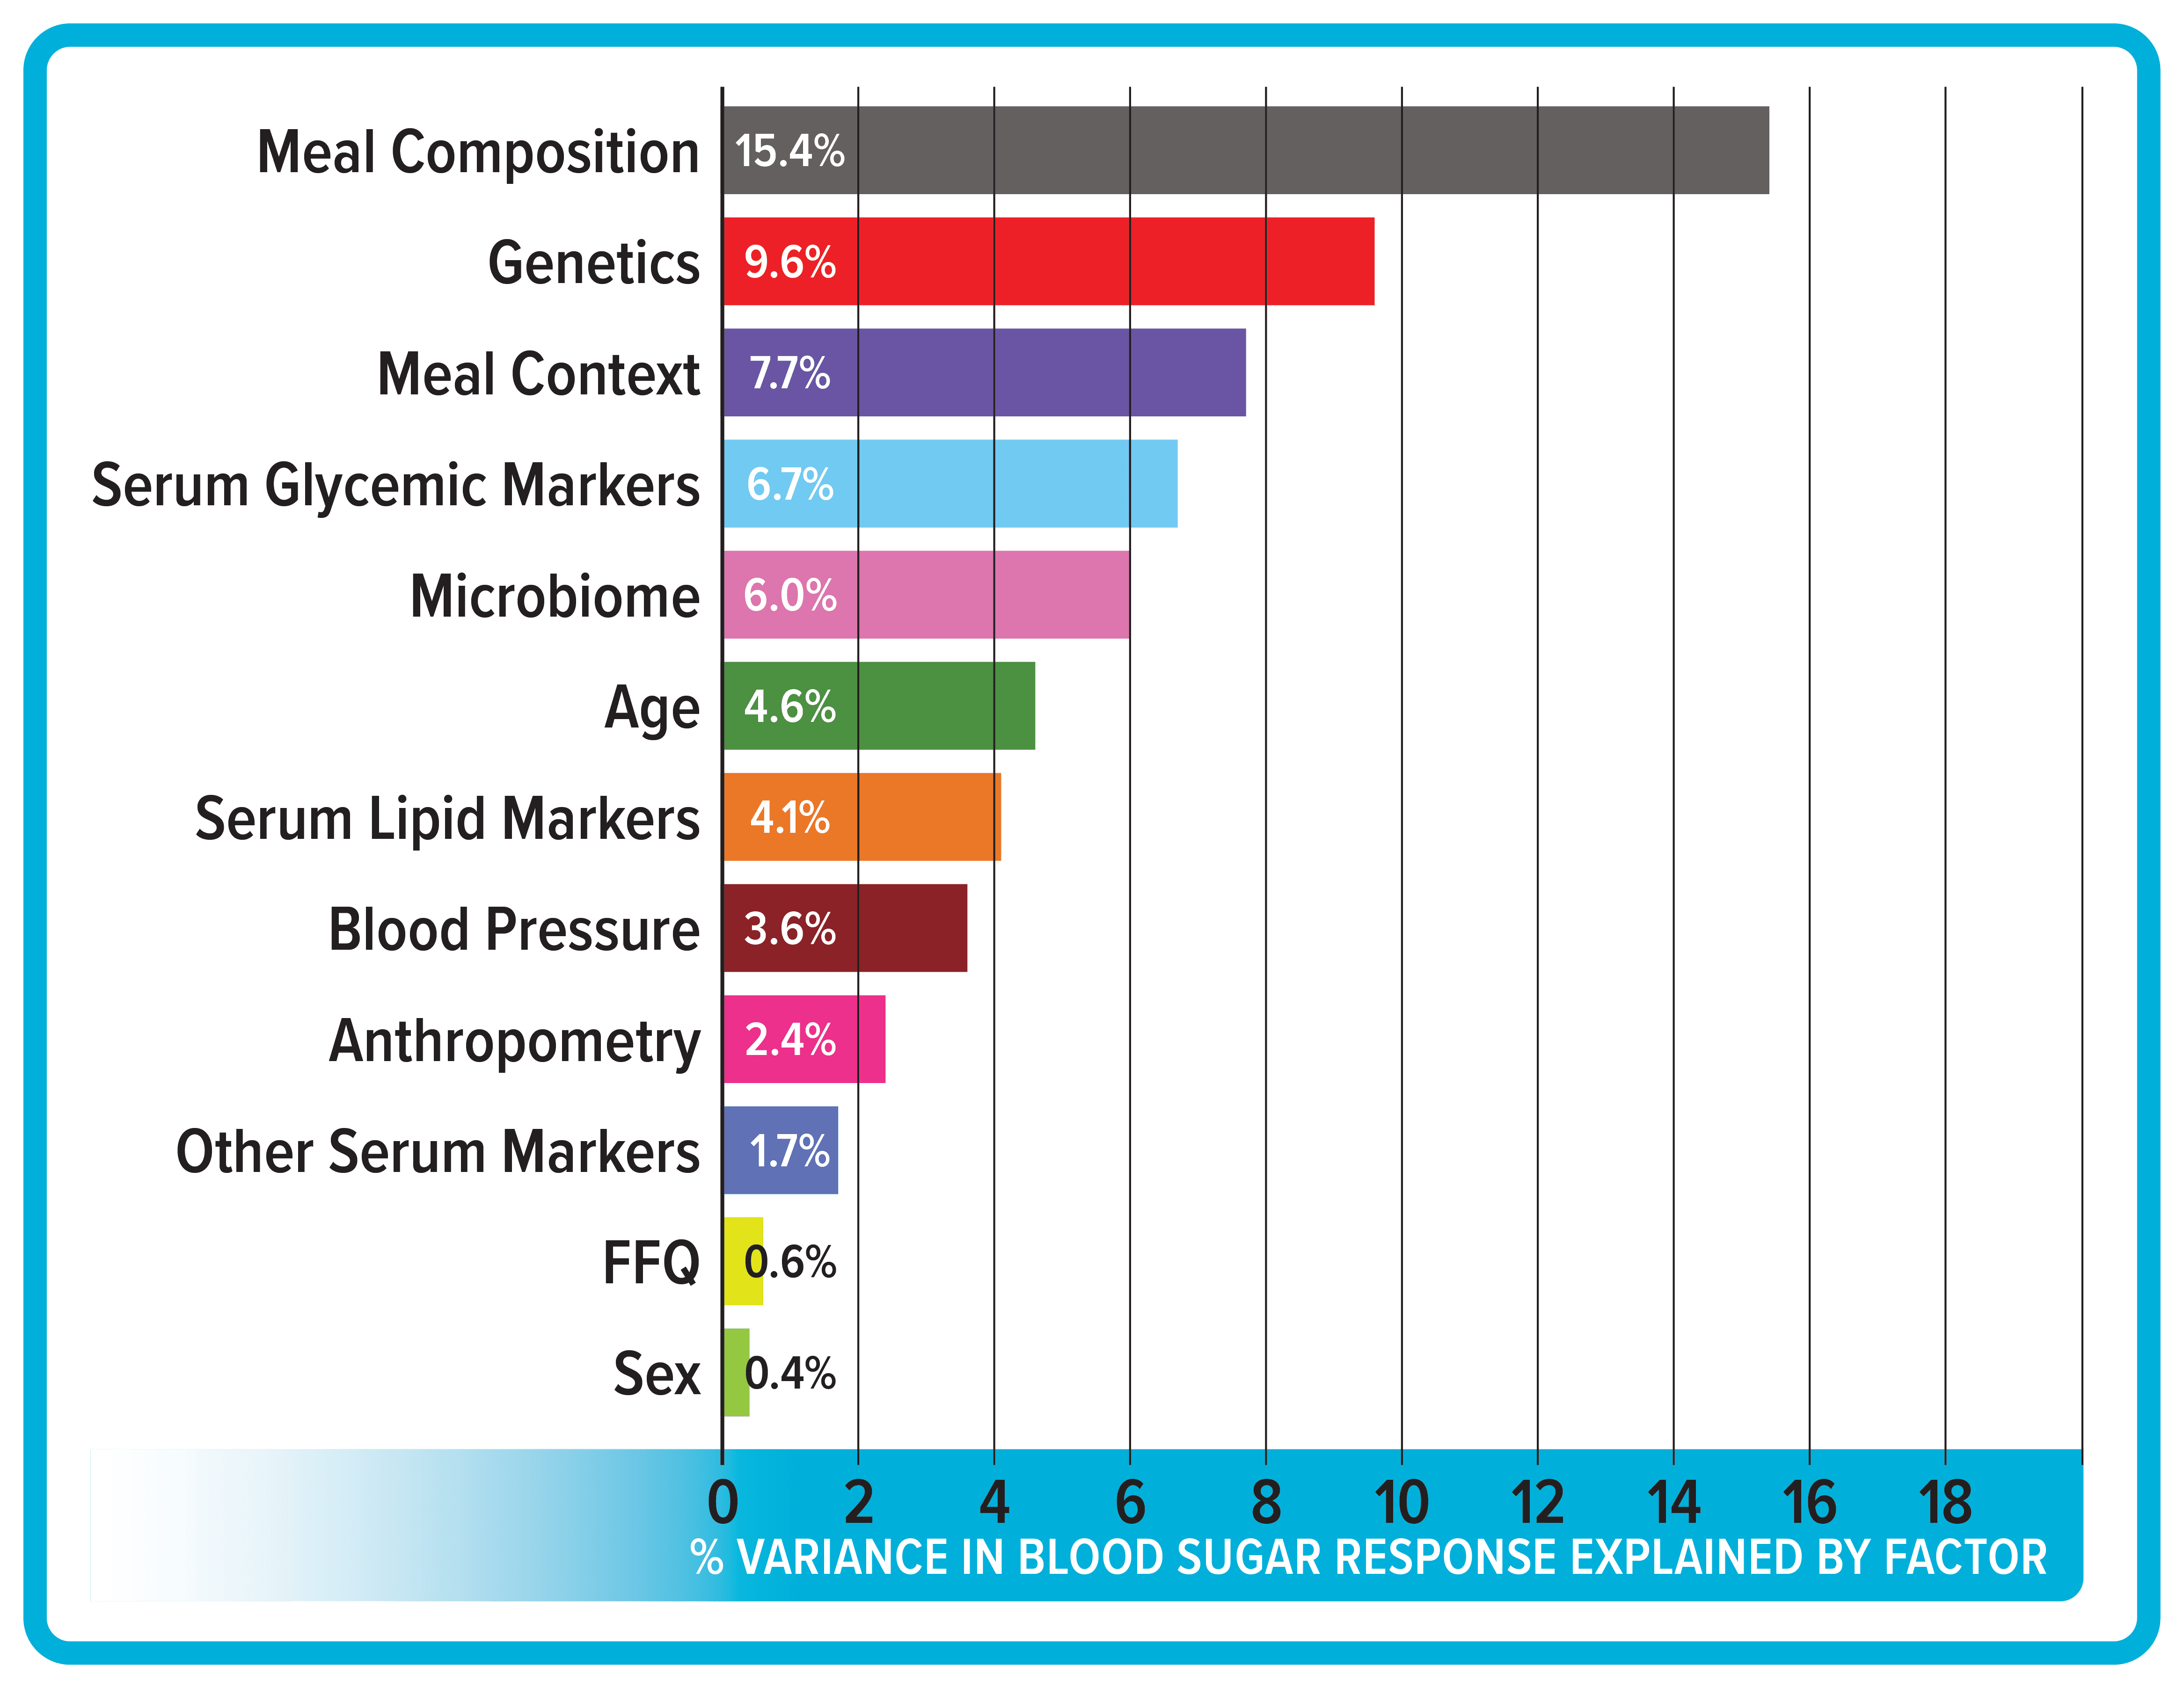 A chart shows several factors that affect blood sugar response. From the top, the factors read (in order of how much they impact glucose response): Meal composition (15.4%), genetics (9.6%), meal context (7.7%), serum glycemic markers (6.7%), microbiome (6.0%), age (4.6%), serum lipid markers (4.1%), blood pressure (3.6%), anthropometry (2.4%), other serum markers (1.7%), FFQ [food frequency questionnaire, which helps measure the affect a person’s habitual diet] (0.6%), *** (0.4%). (Note: Continuous glucose monitors allow you to see how anything from an individual food to a full meal affects your blog sugar in real time.)